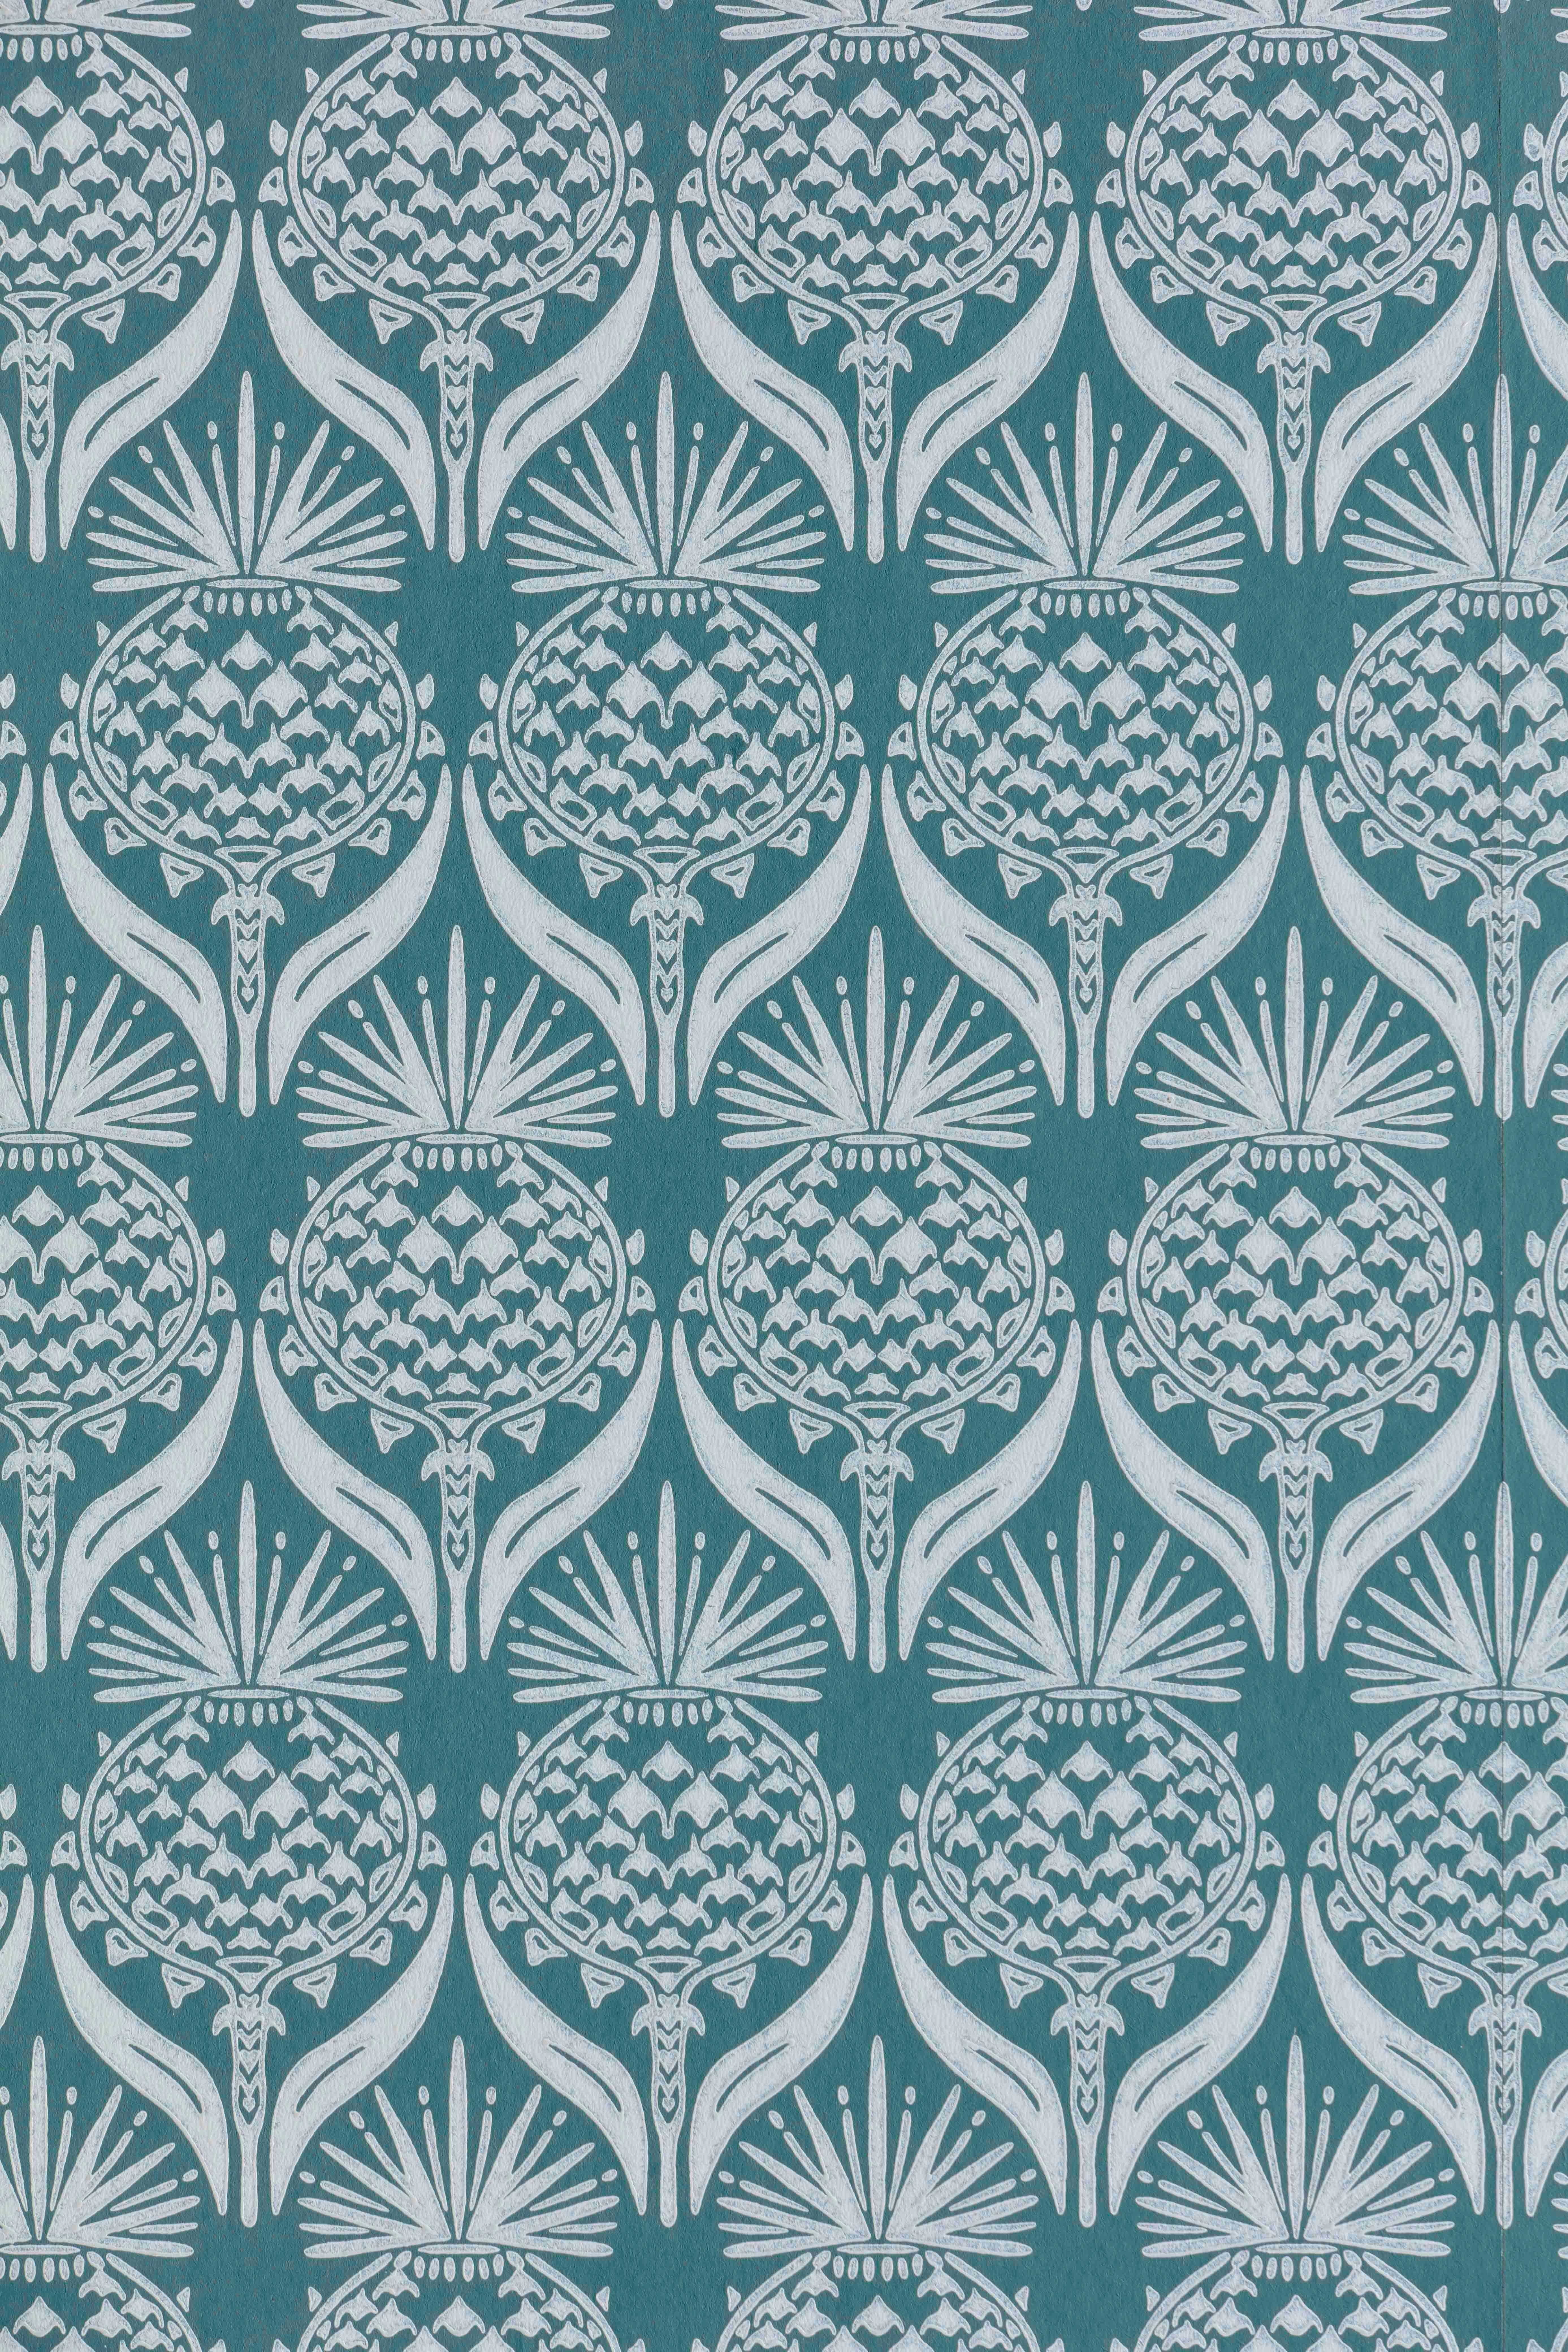 Paper 'Artichoke Thistle' Contemporary, Traditional Wallpaper in Teal For Sale